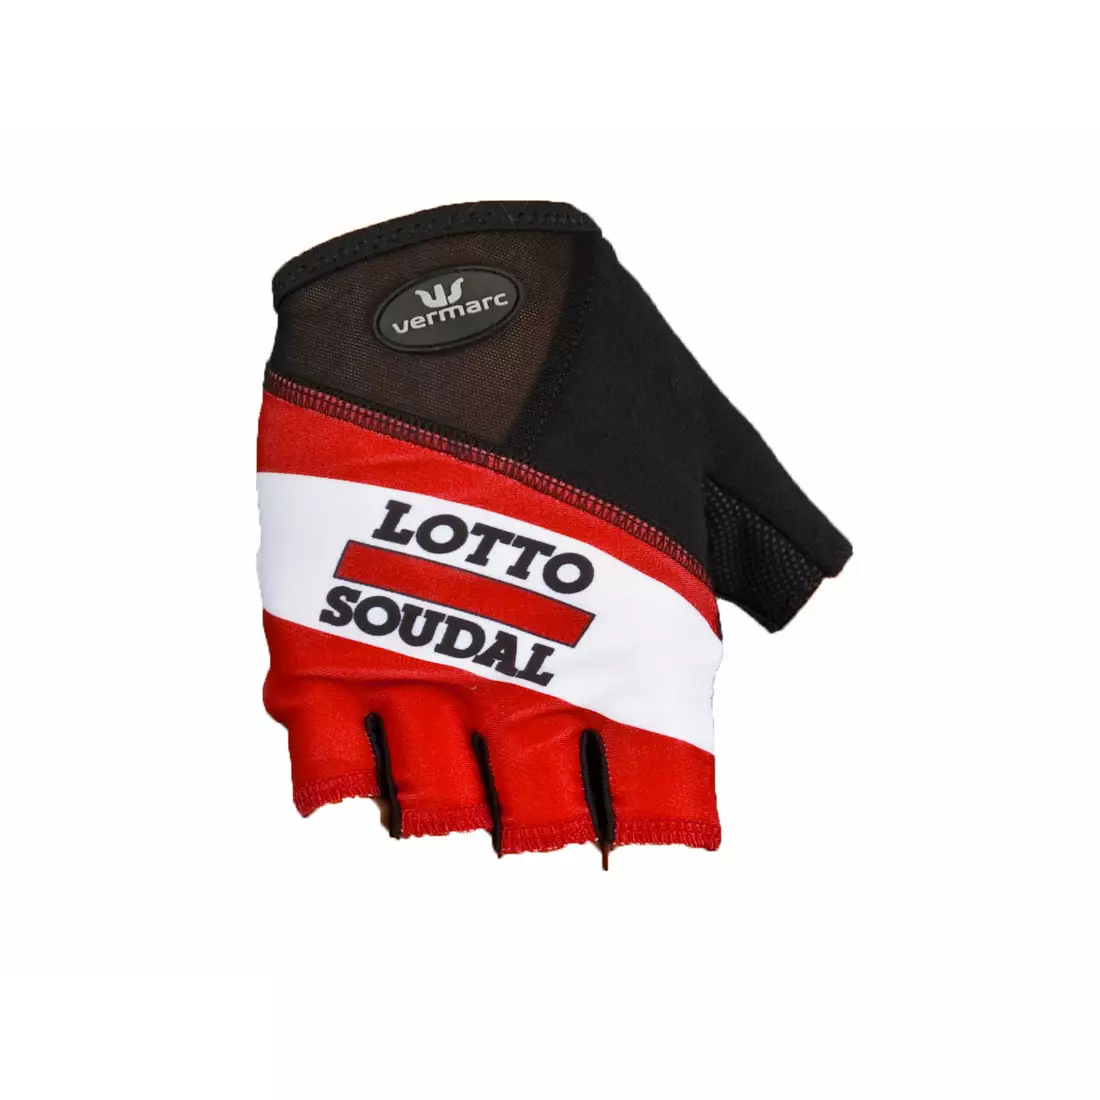 LOTTO SOUDAL cycling gloves 2015